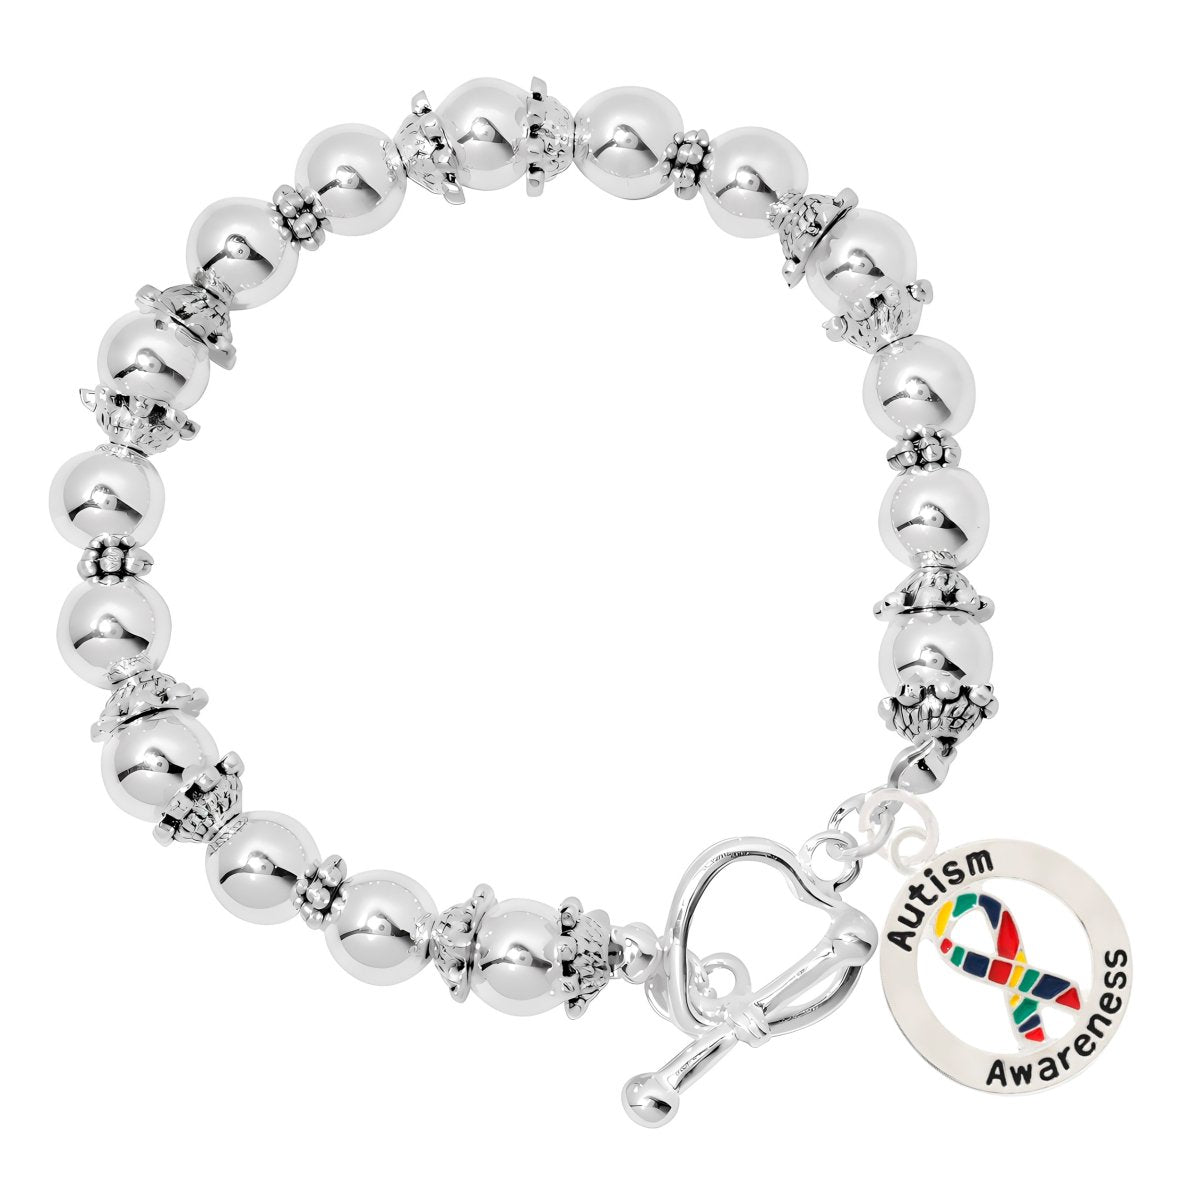 Round Autism Awareness Silver Beaded Bracelets - Fundraising For A Cause